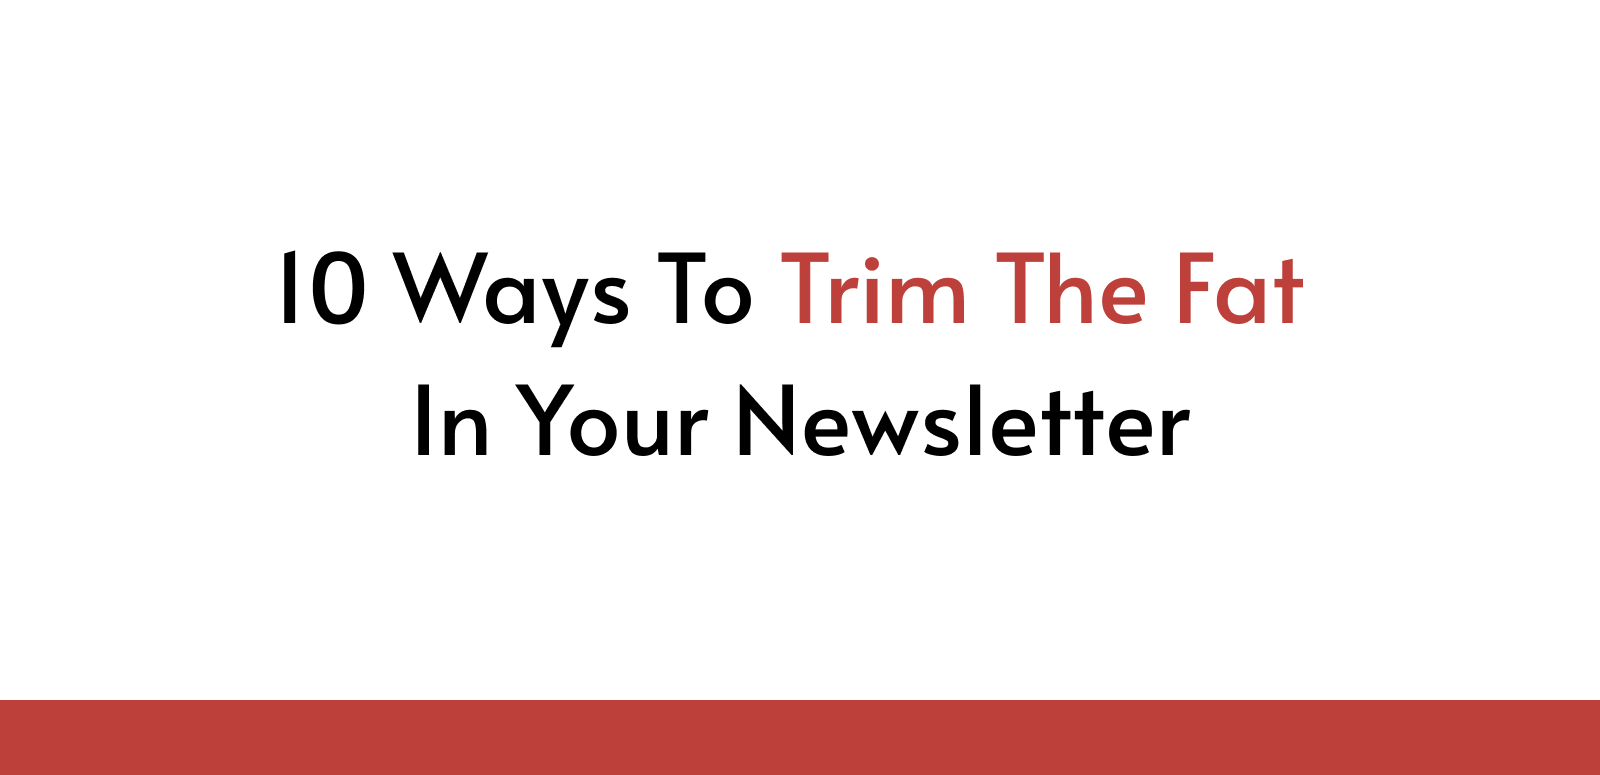 10 Ways To Trim The Fat In Your Newsletter